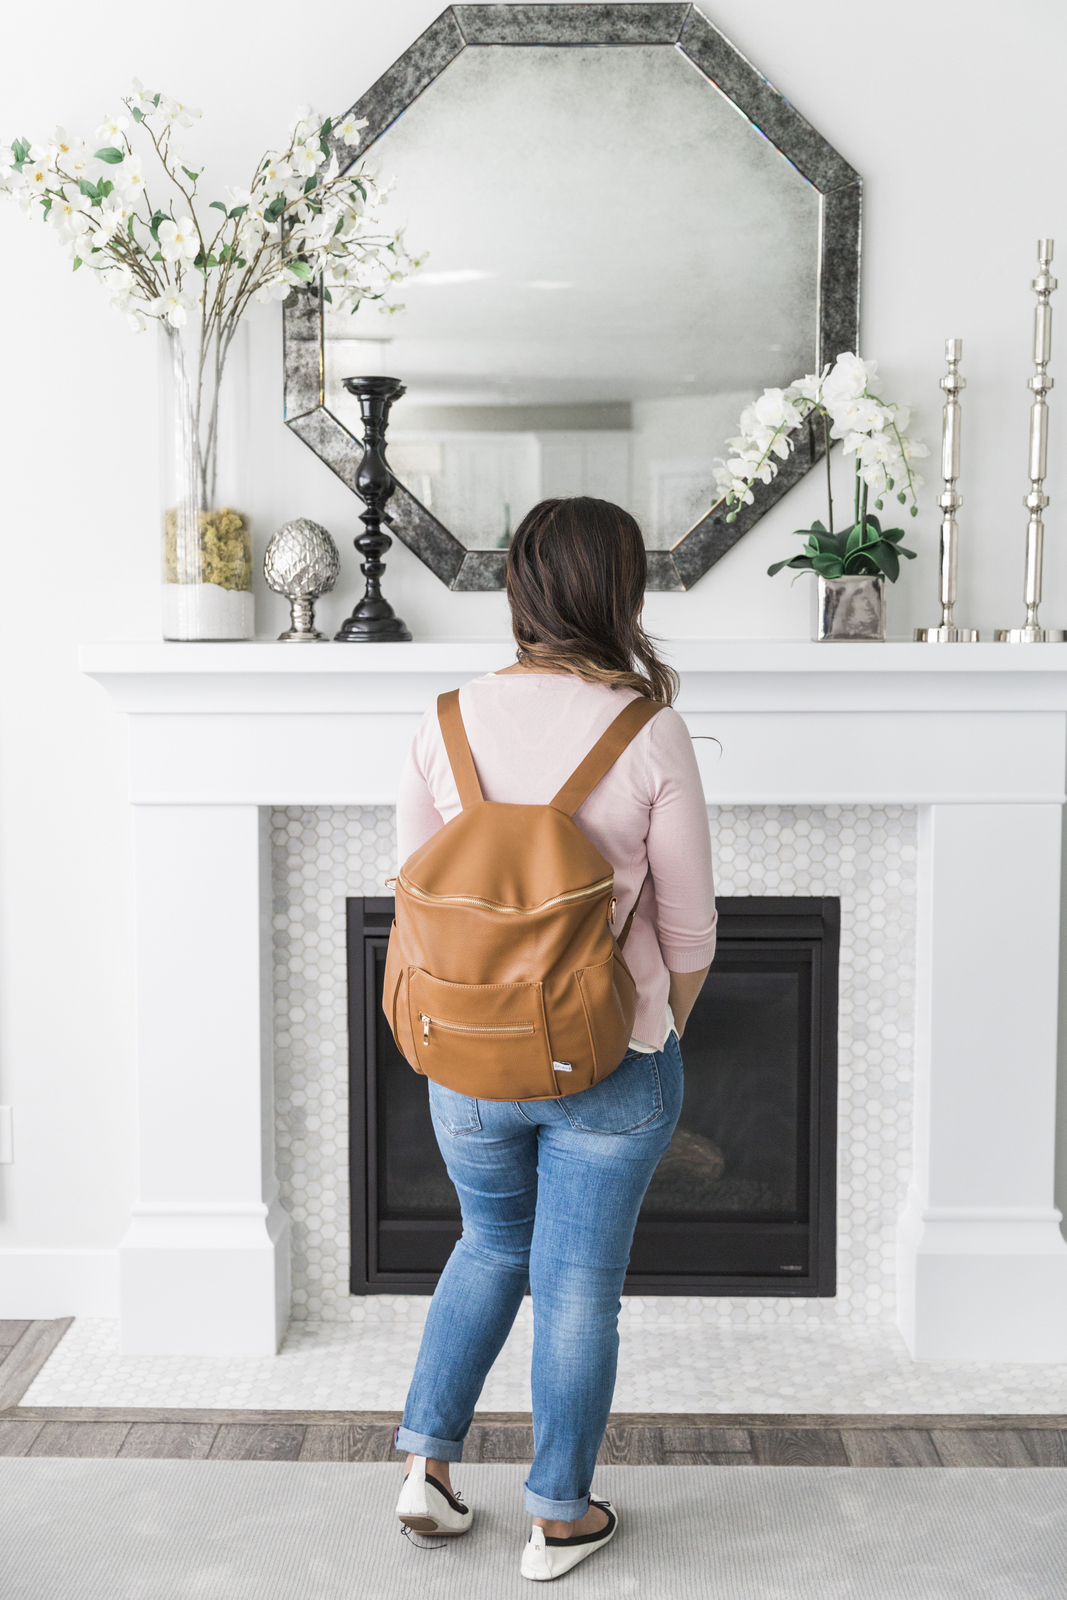 Fawn Design Diaper Bags. Unique Backpacks, Baby Bags & More